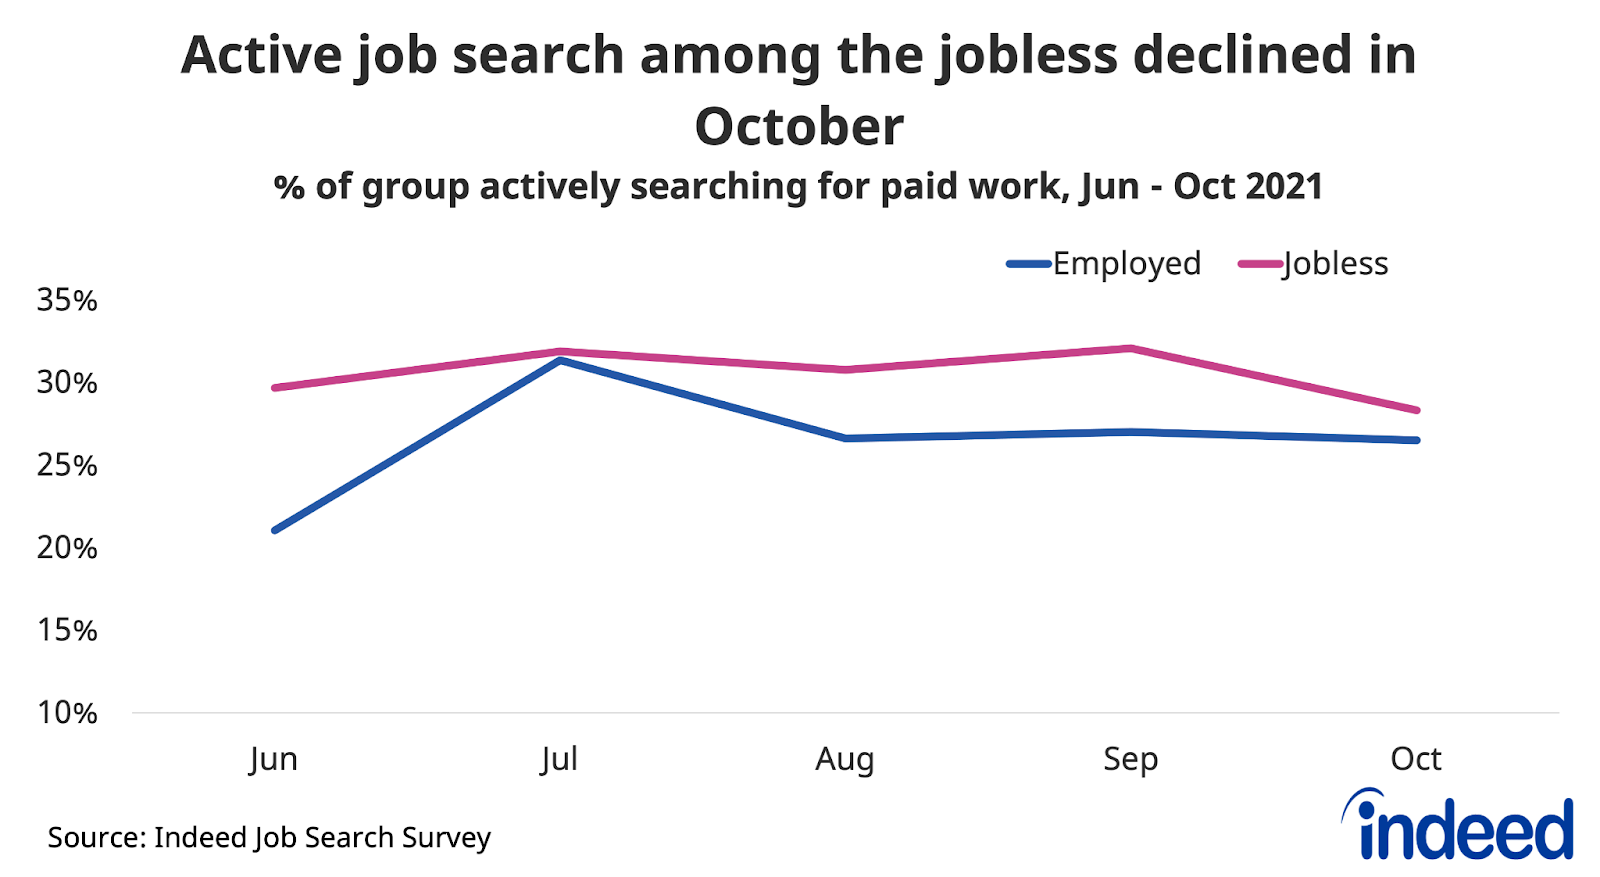 Line chart titled “Active job search among the jobless declined in October.”